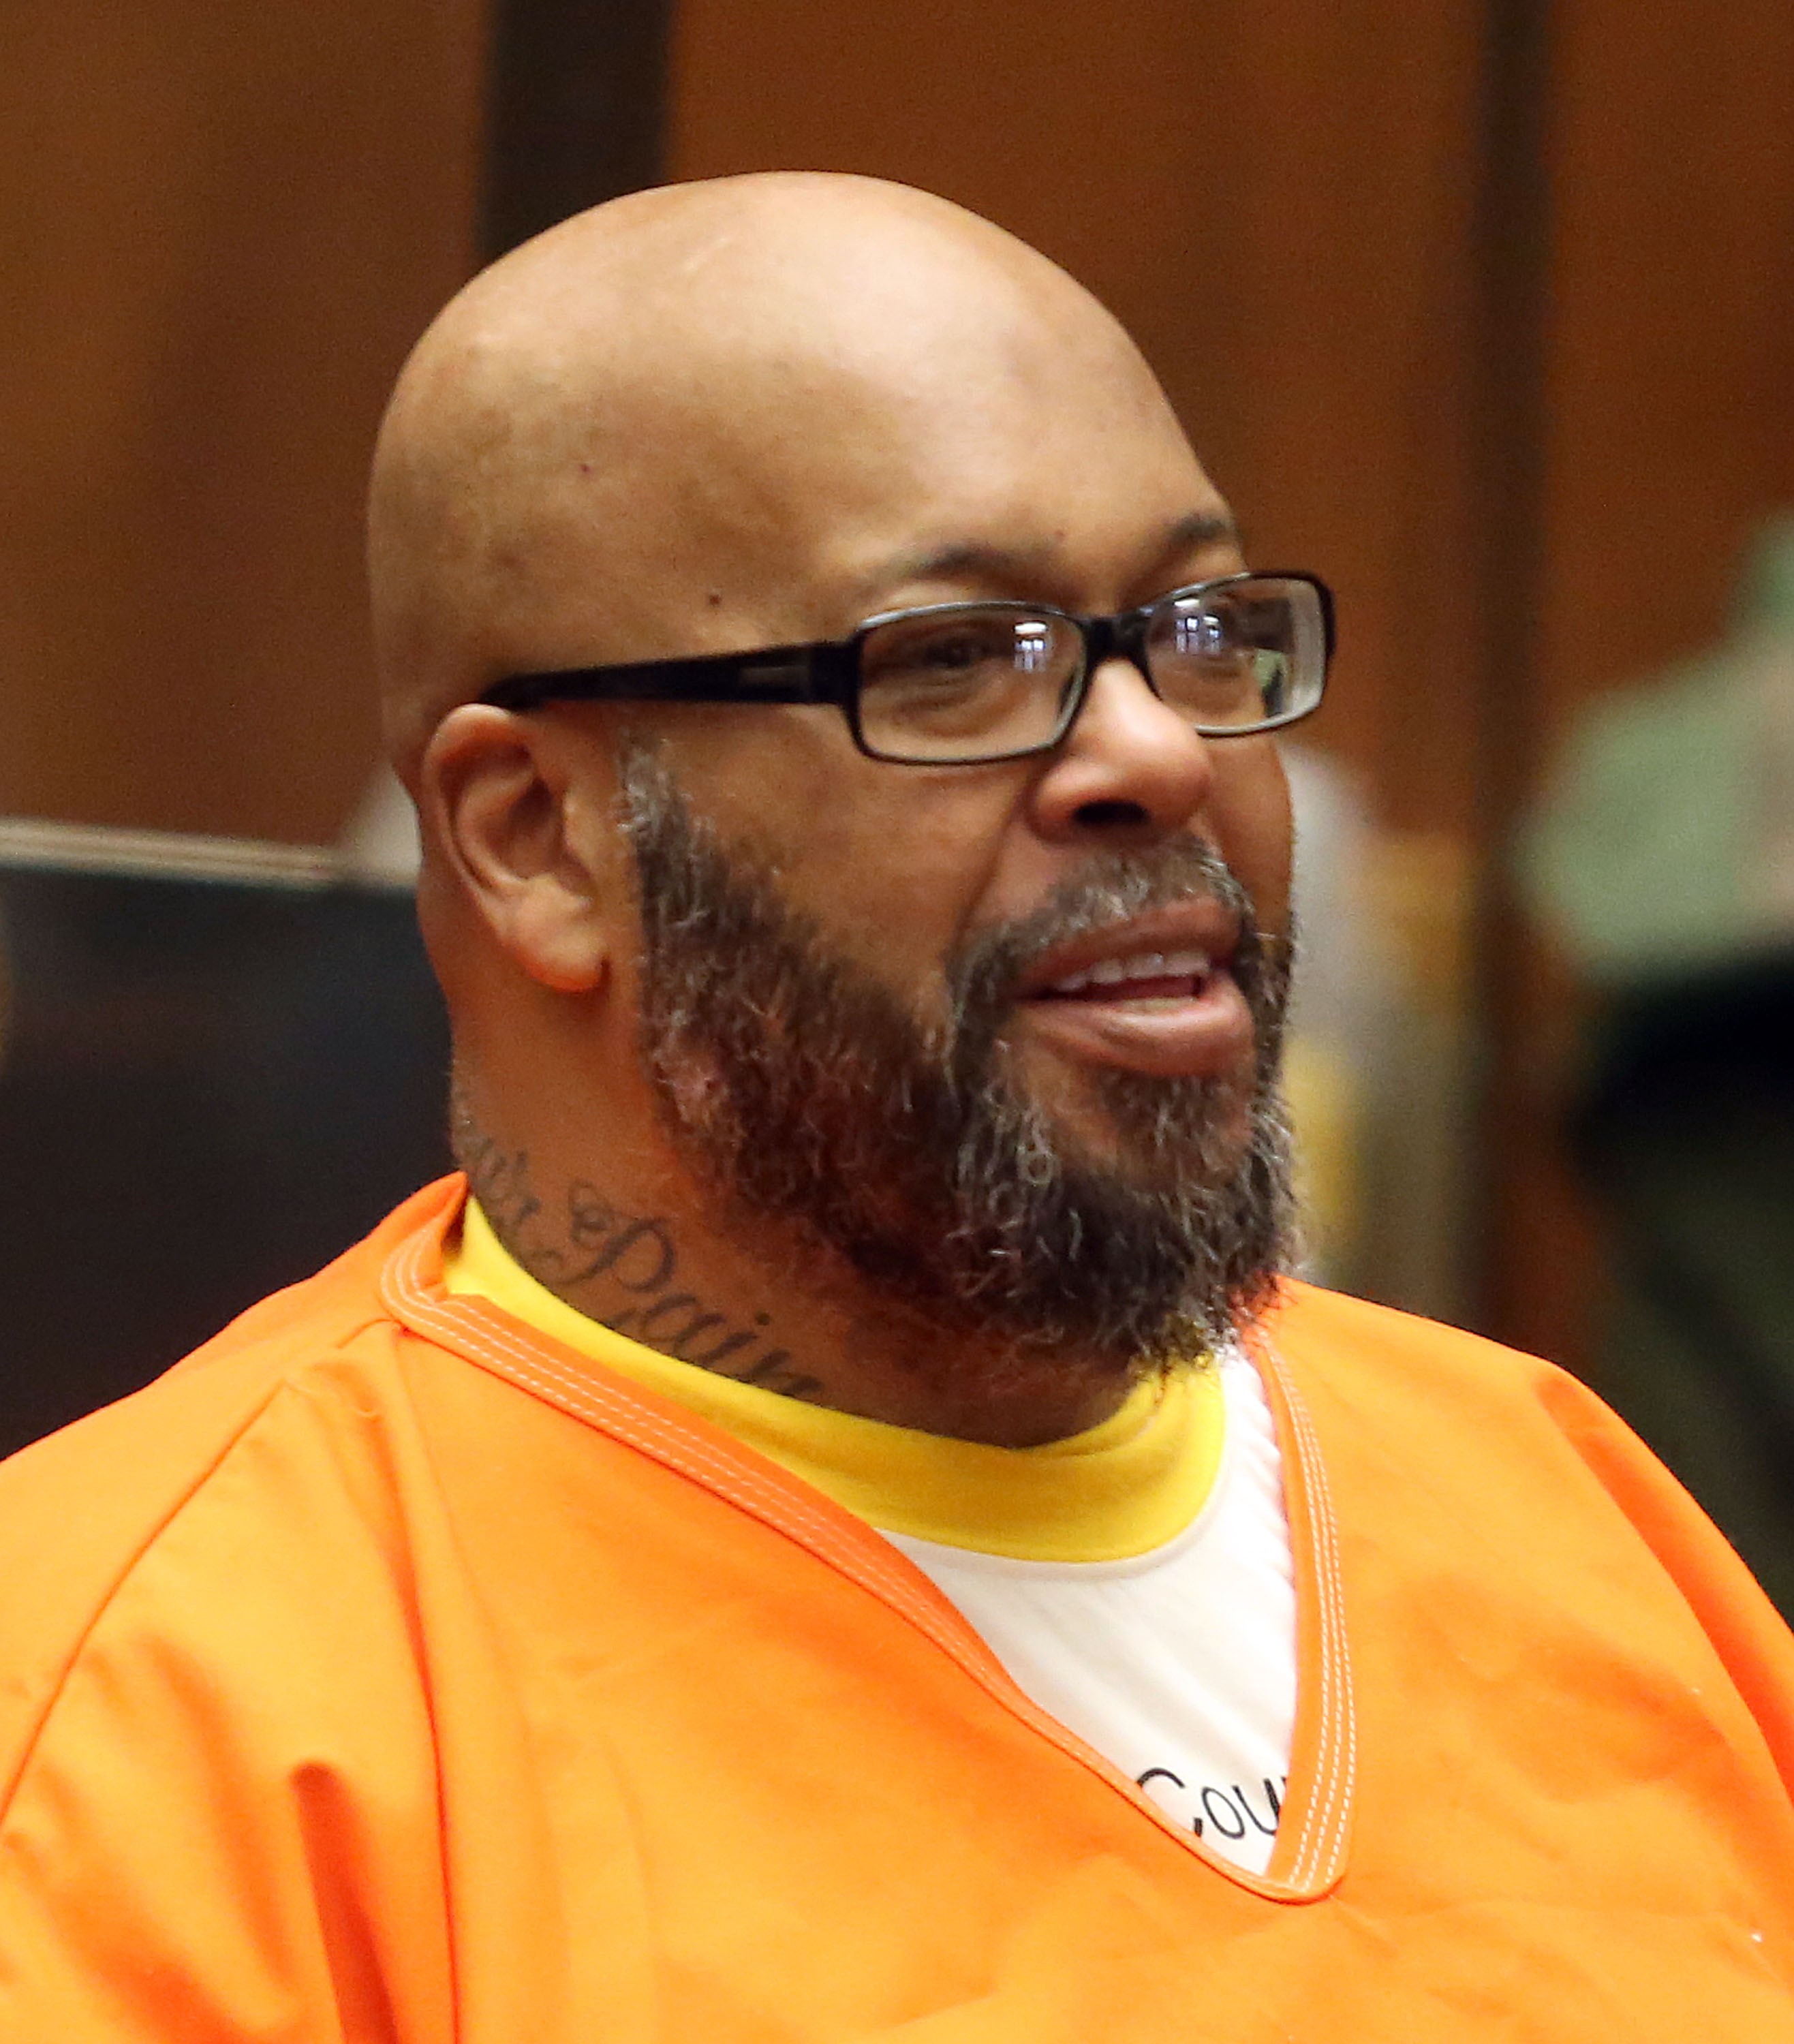 Suge Knight Takes Plea Deal, Gets 28 Year Sentence The Latest HipHop